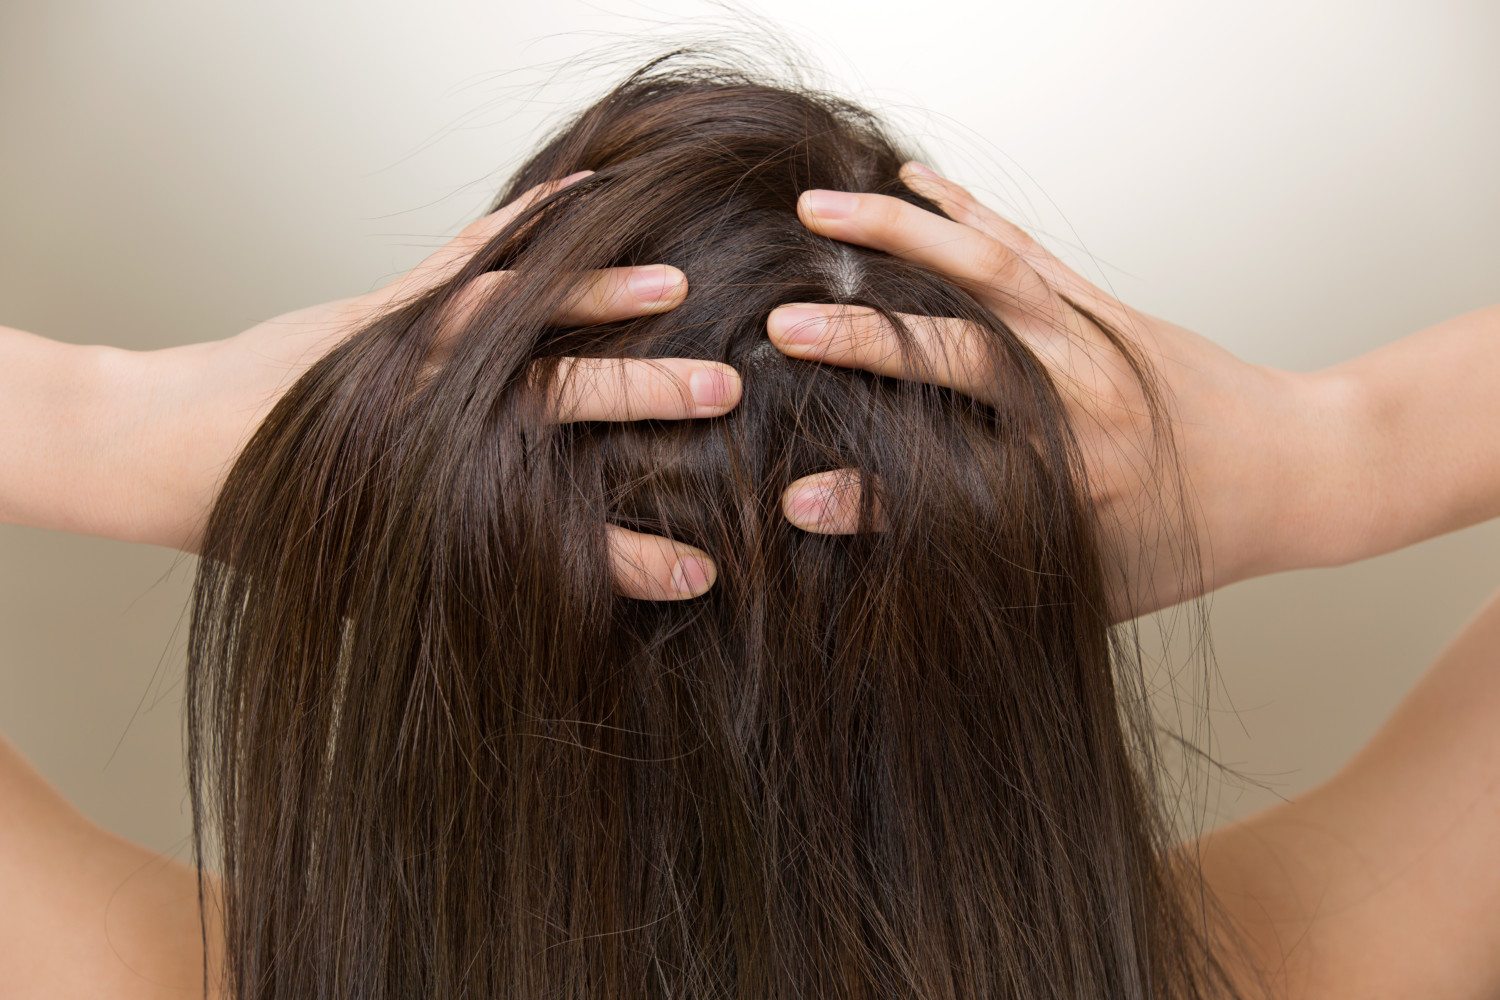 Why Does My Scalp Hurt When My Hair Is Dirty? - Simplemost